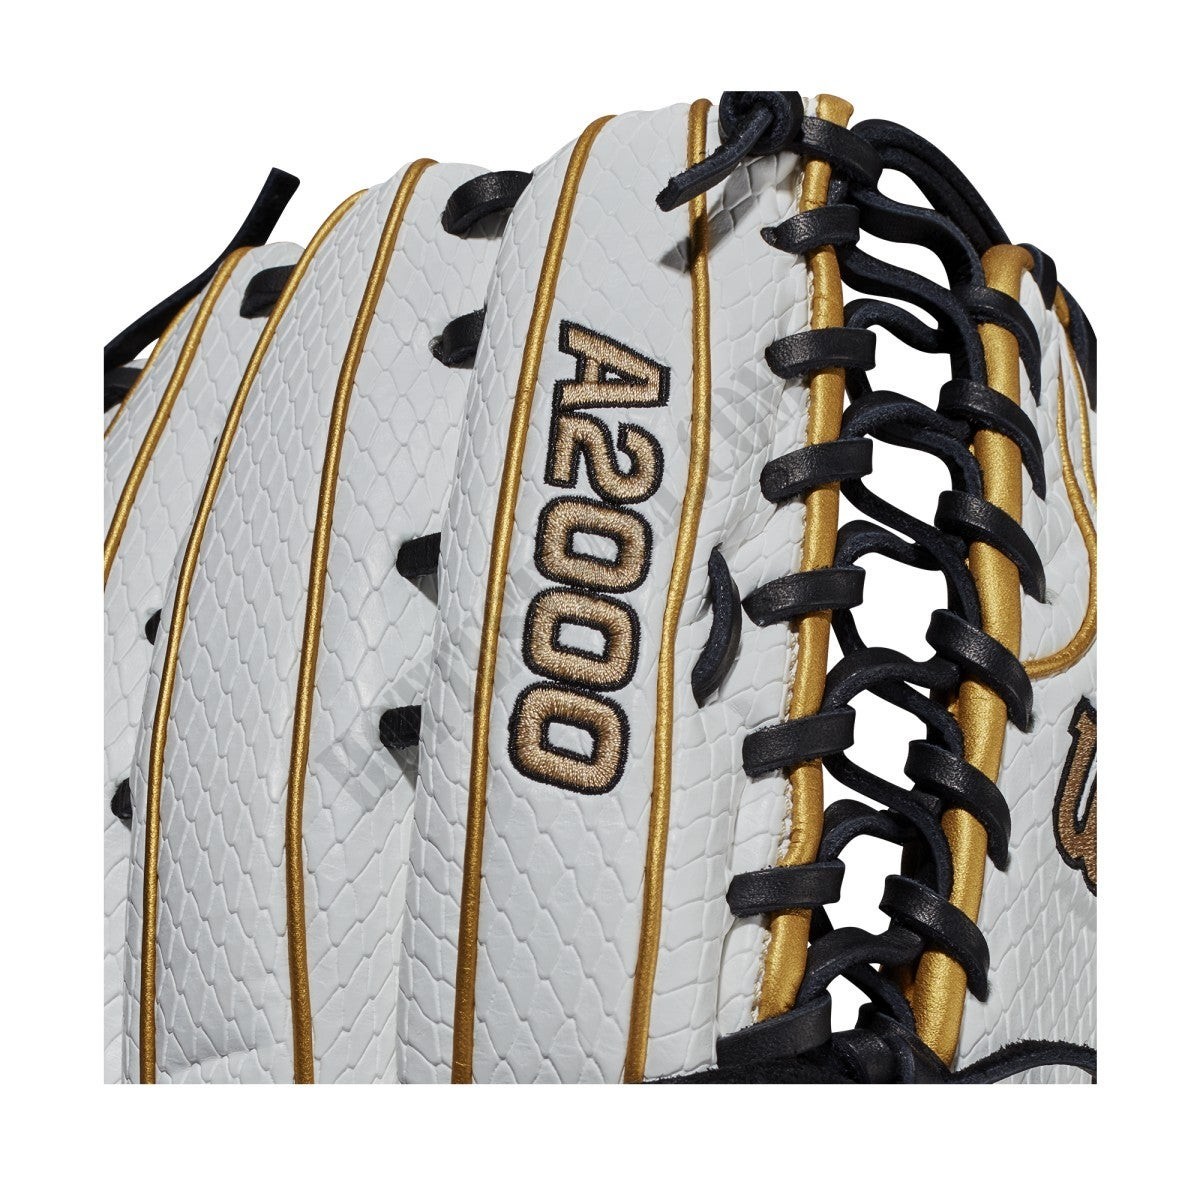 2021 A2000 OT7SS Six String 12.75" Outfield Baseball Glove ● Wilson Promotions - -6